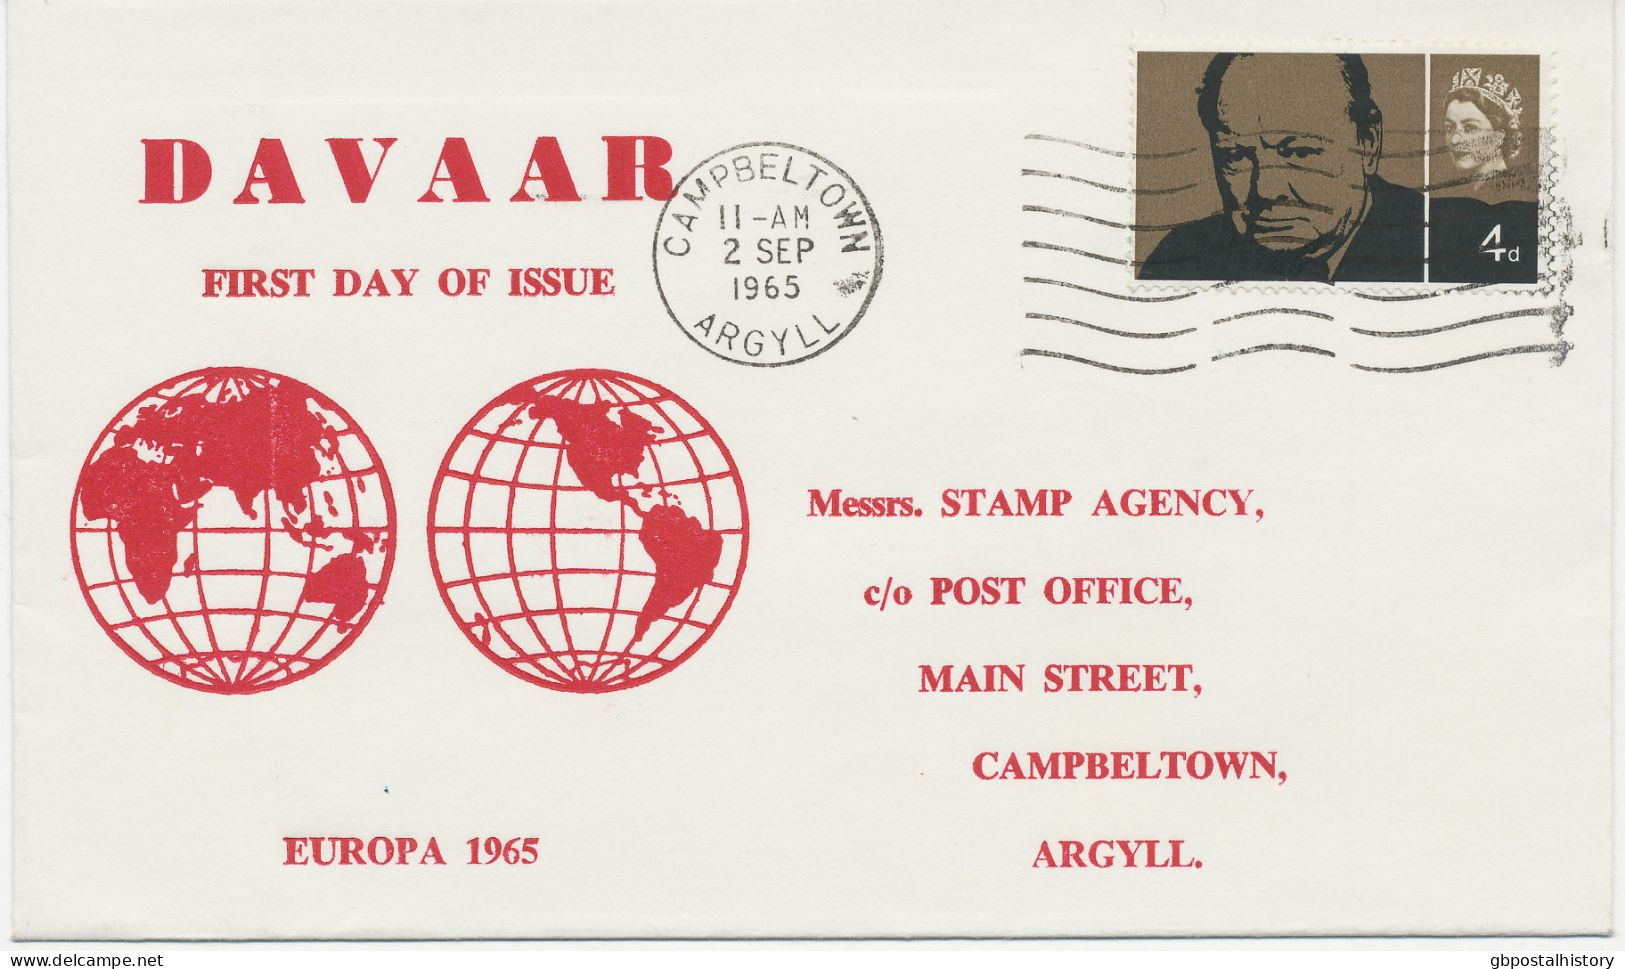 GB Davaar Island COLLECTION 1964/6 7 Different FDC's All Rare EUROPE-CEPT Issues Extremely Rare As Well As Two DIANA FDC - Cartas & Documentos